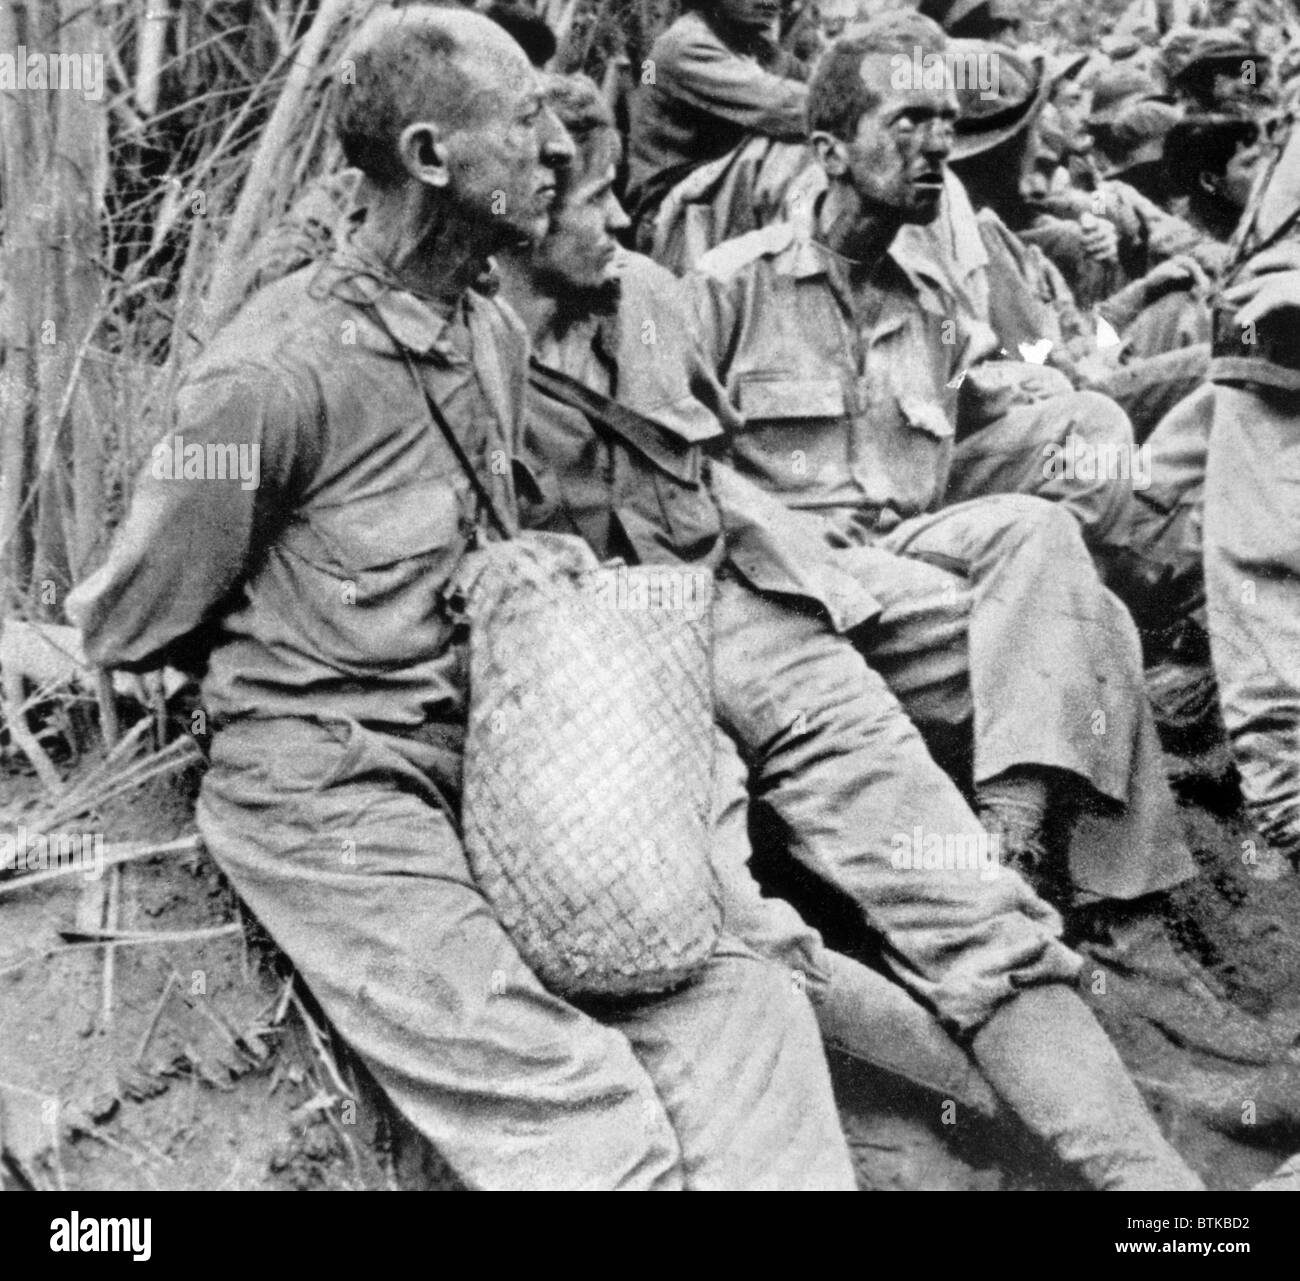 World War II, The Bataan Death March, American prisoners in the Philippines, 1942 Stock Photo